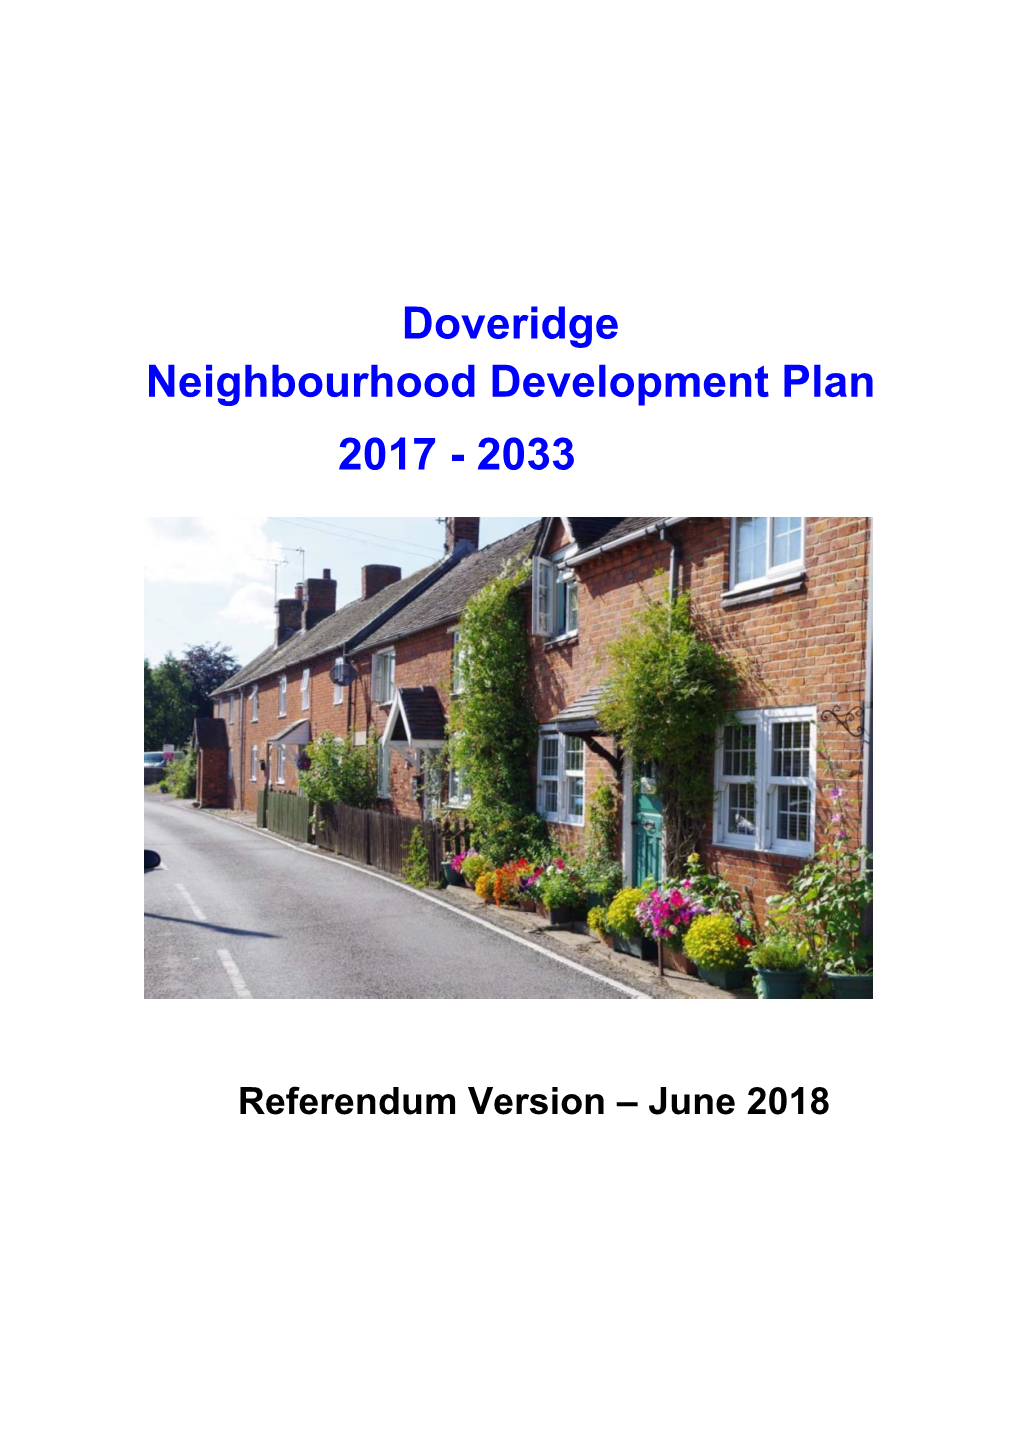 The Doveridge Neighbourhood Development Plan Must Reflect the Strategic Policies of the Adopted Derbyshire Dales Local Plan to 2033